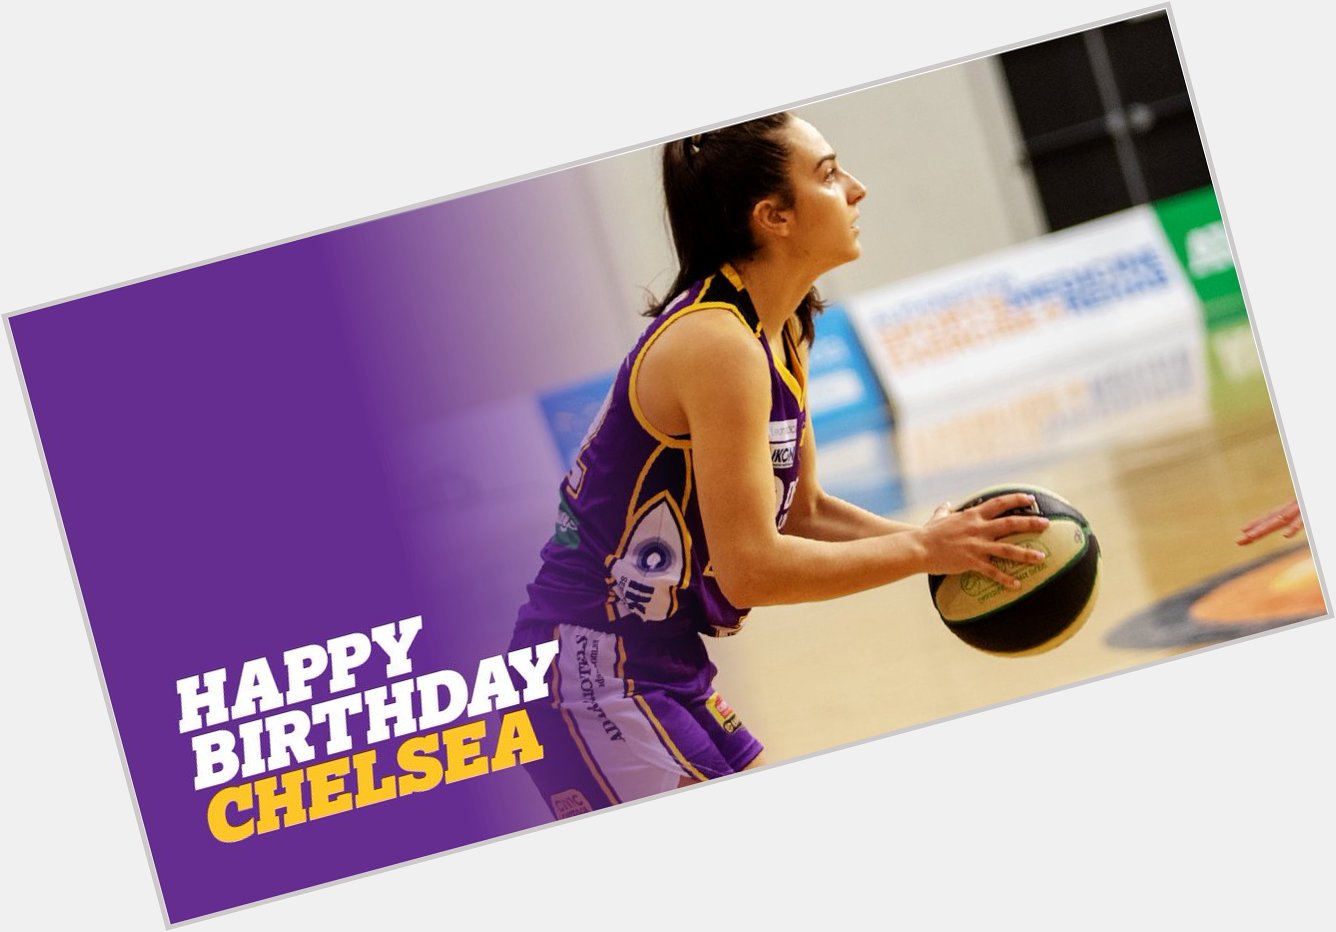 The Boomers want to wish a massive happy Birthday to Chelsea D\Angelo! 